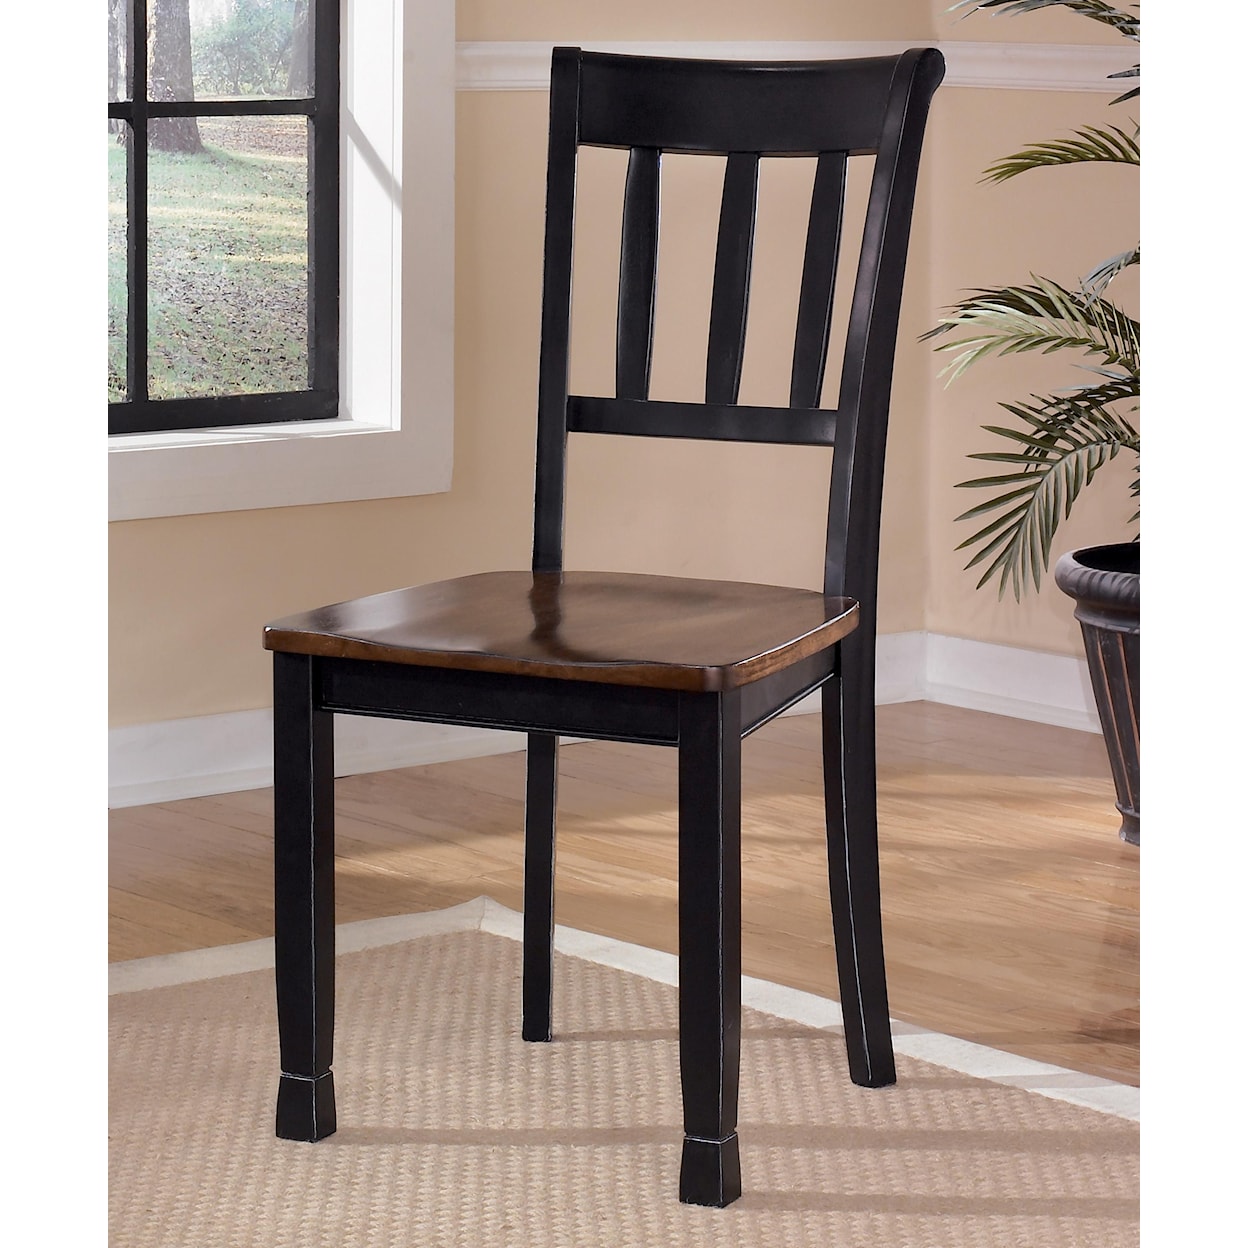 Benchcraft Owingsville Dining Room Side Chair